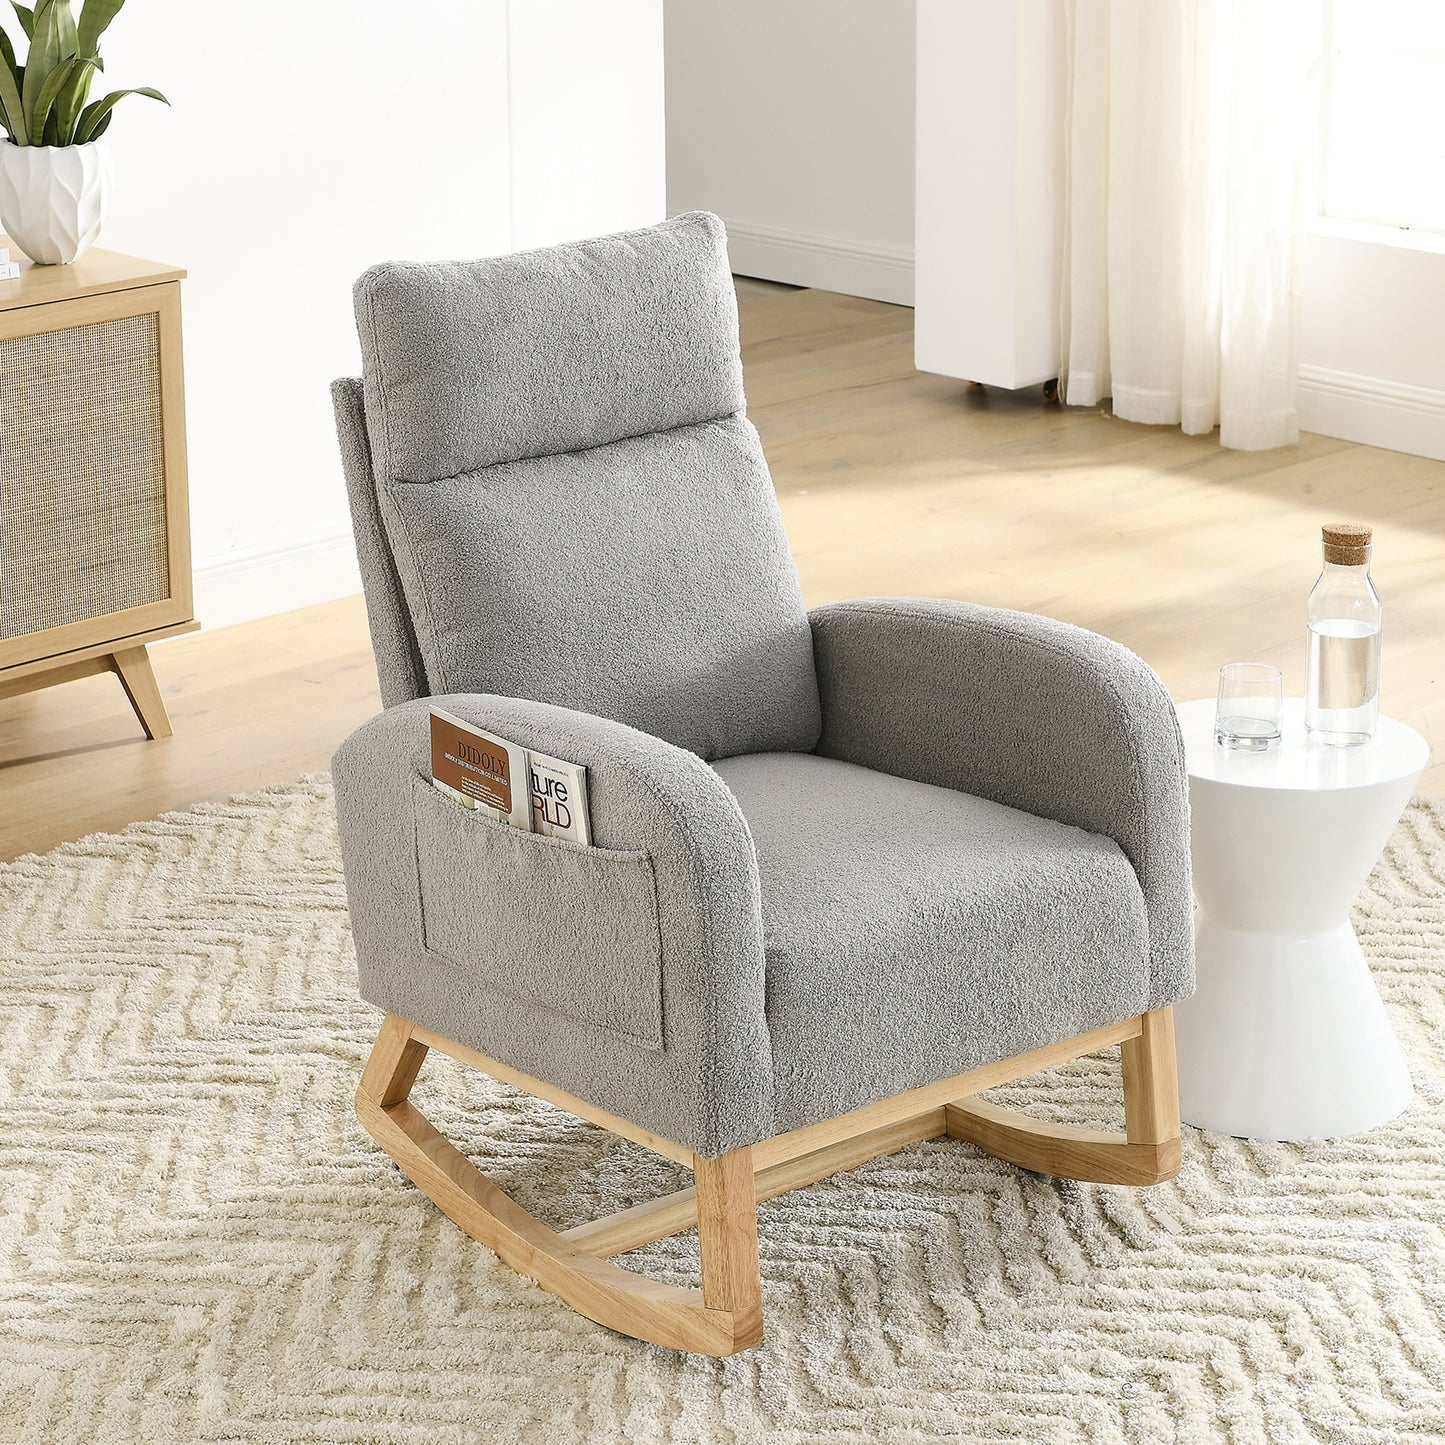 SYNGAR Rocking Chair, Upholstered Fabric Nursery Chair, Nursery Glider with High Back and 2 Side Pockets, Rocking Chairs with Wood Curved Base, Glider Chair for Nursery, Living Room, Home Office